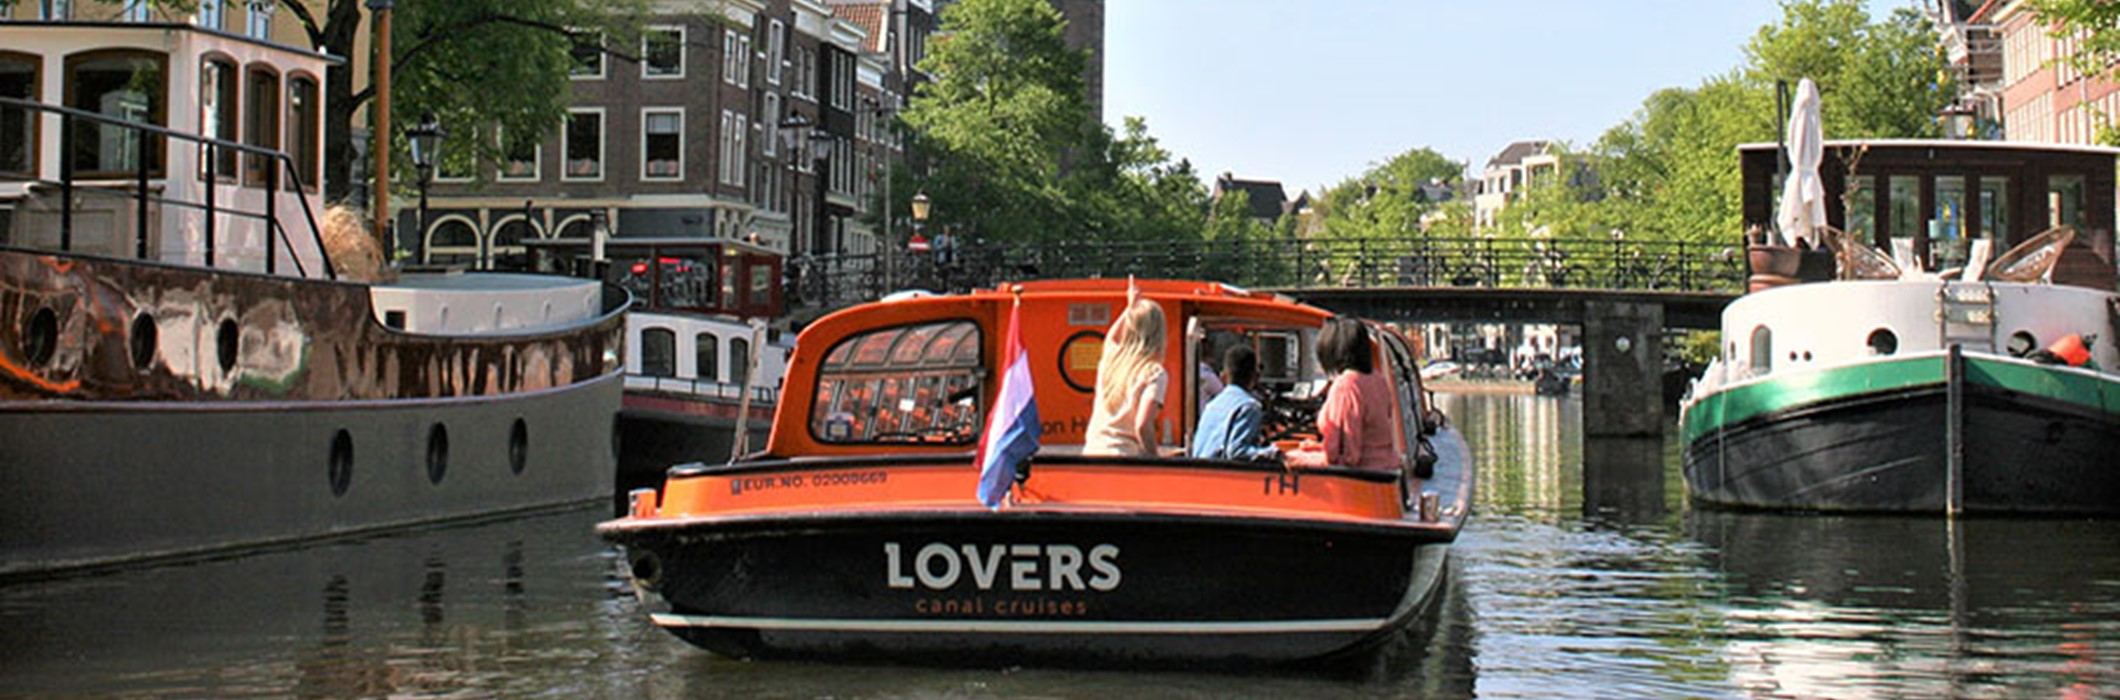 1 h. Amsterdam Day Canal Cruise (departs near the Anne Frank House)